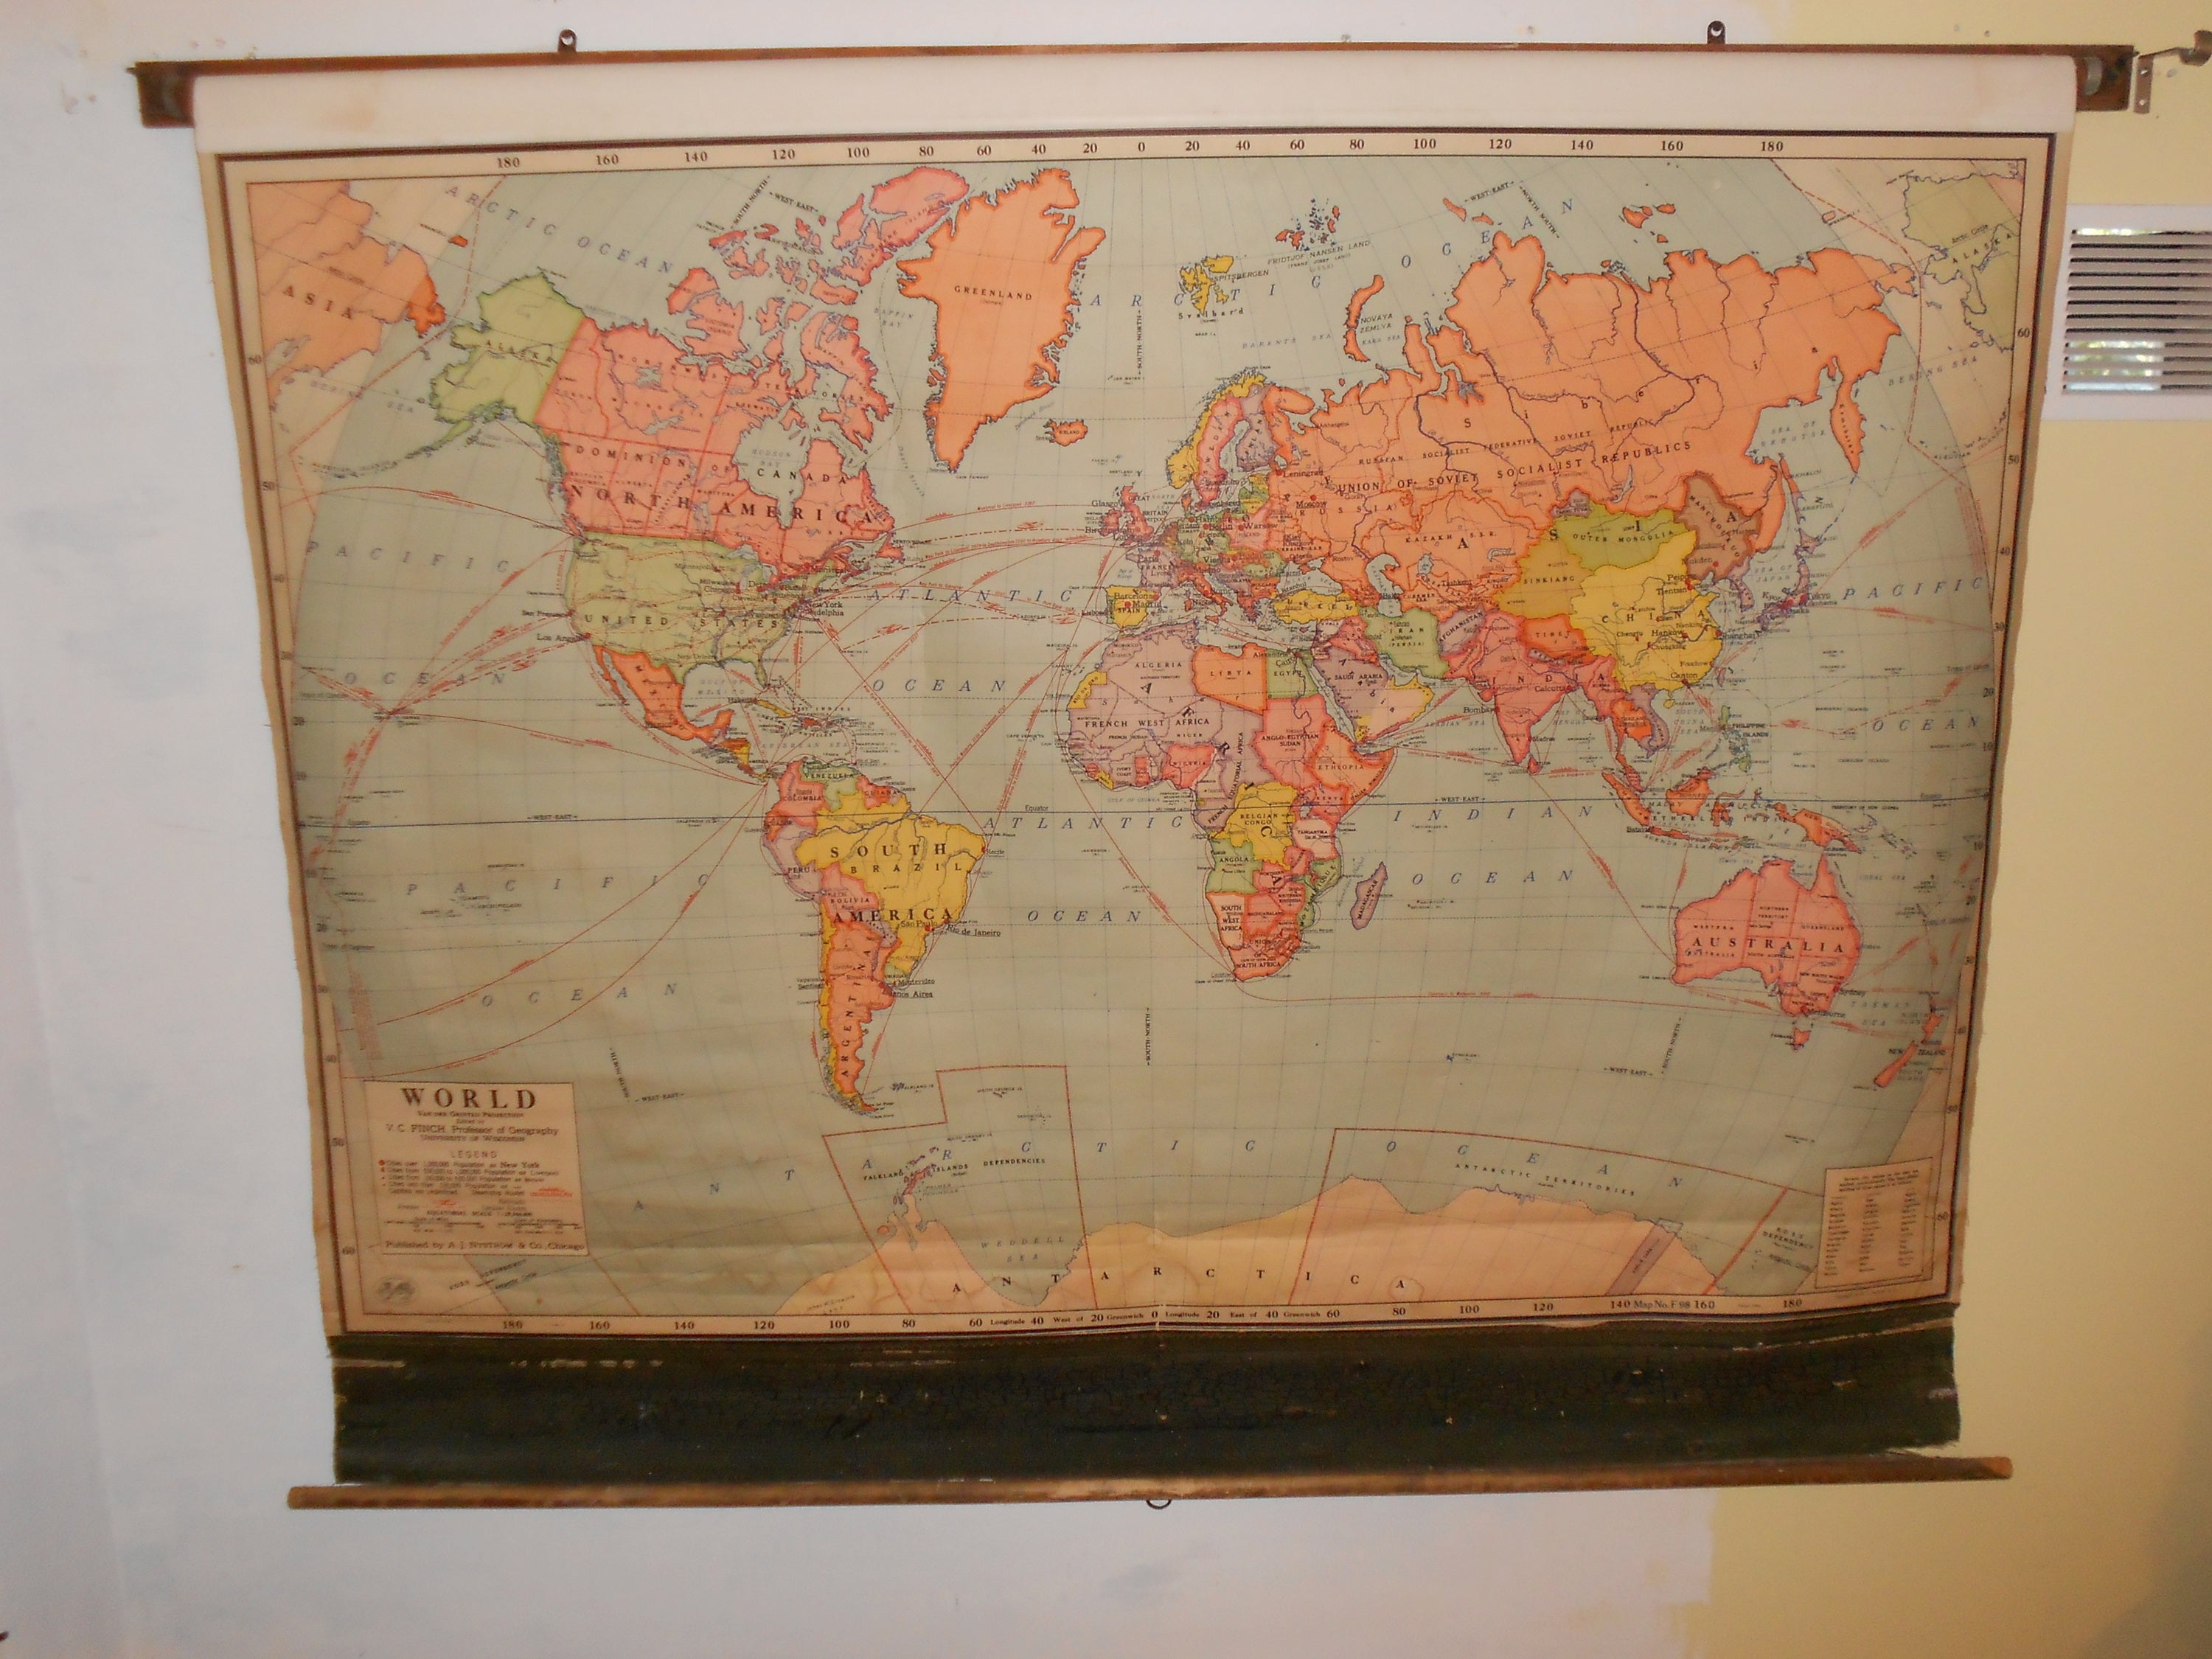 School Map of The World, 1944 edition.